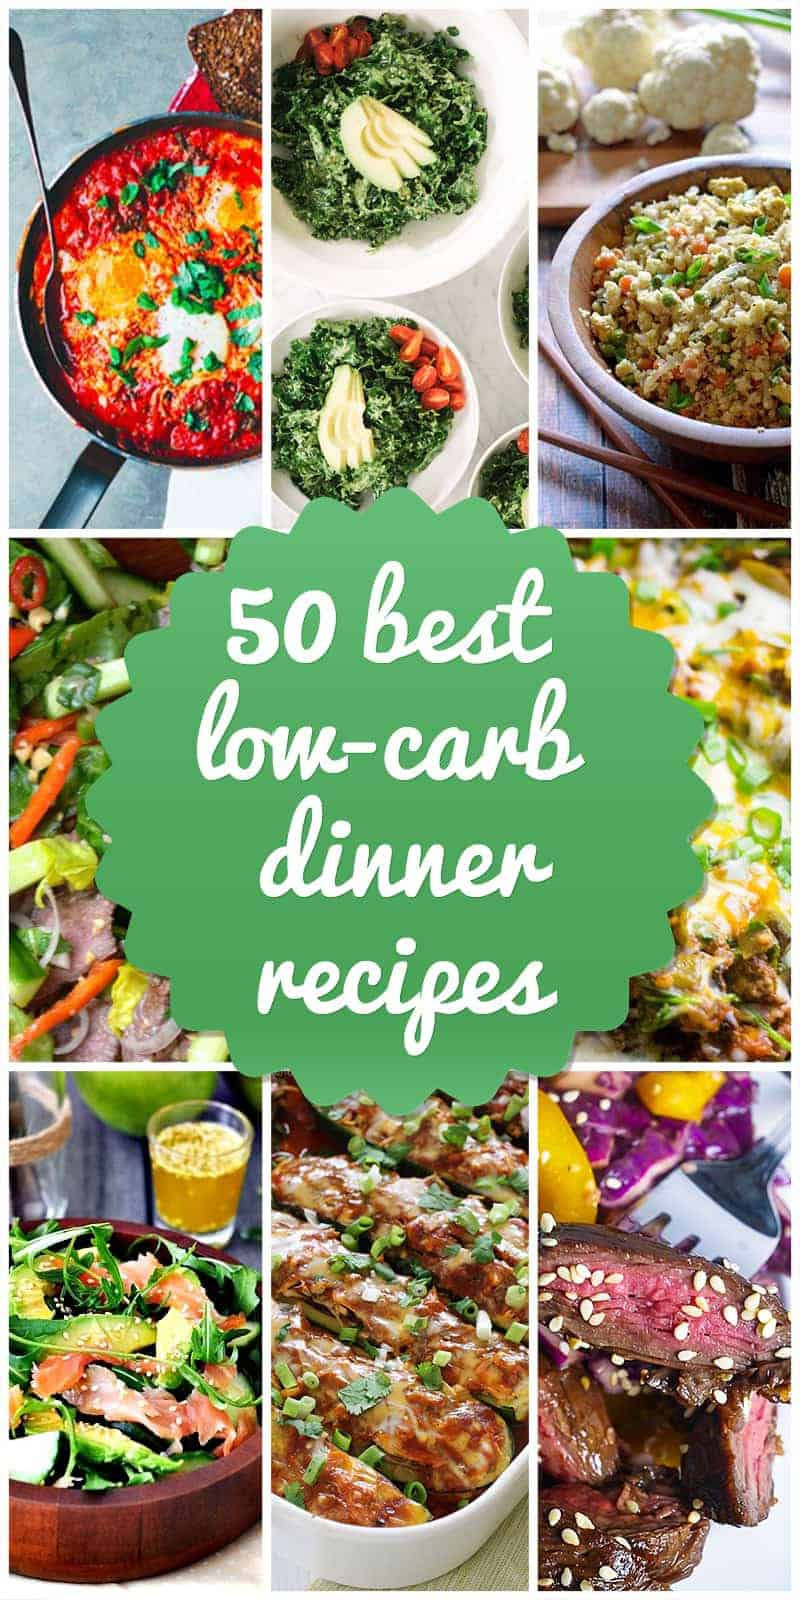 Low Carb Summer Dinners
 50 Best Low Carb Dinners Recipes and Ideas